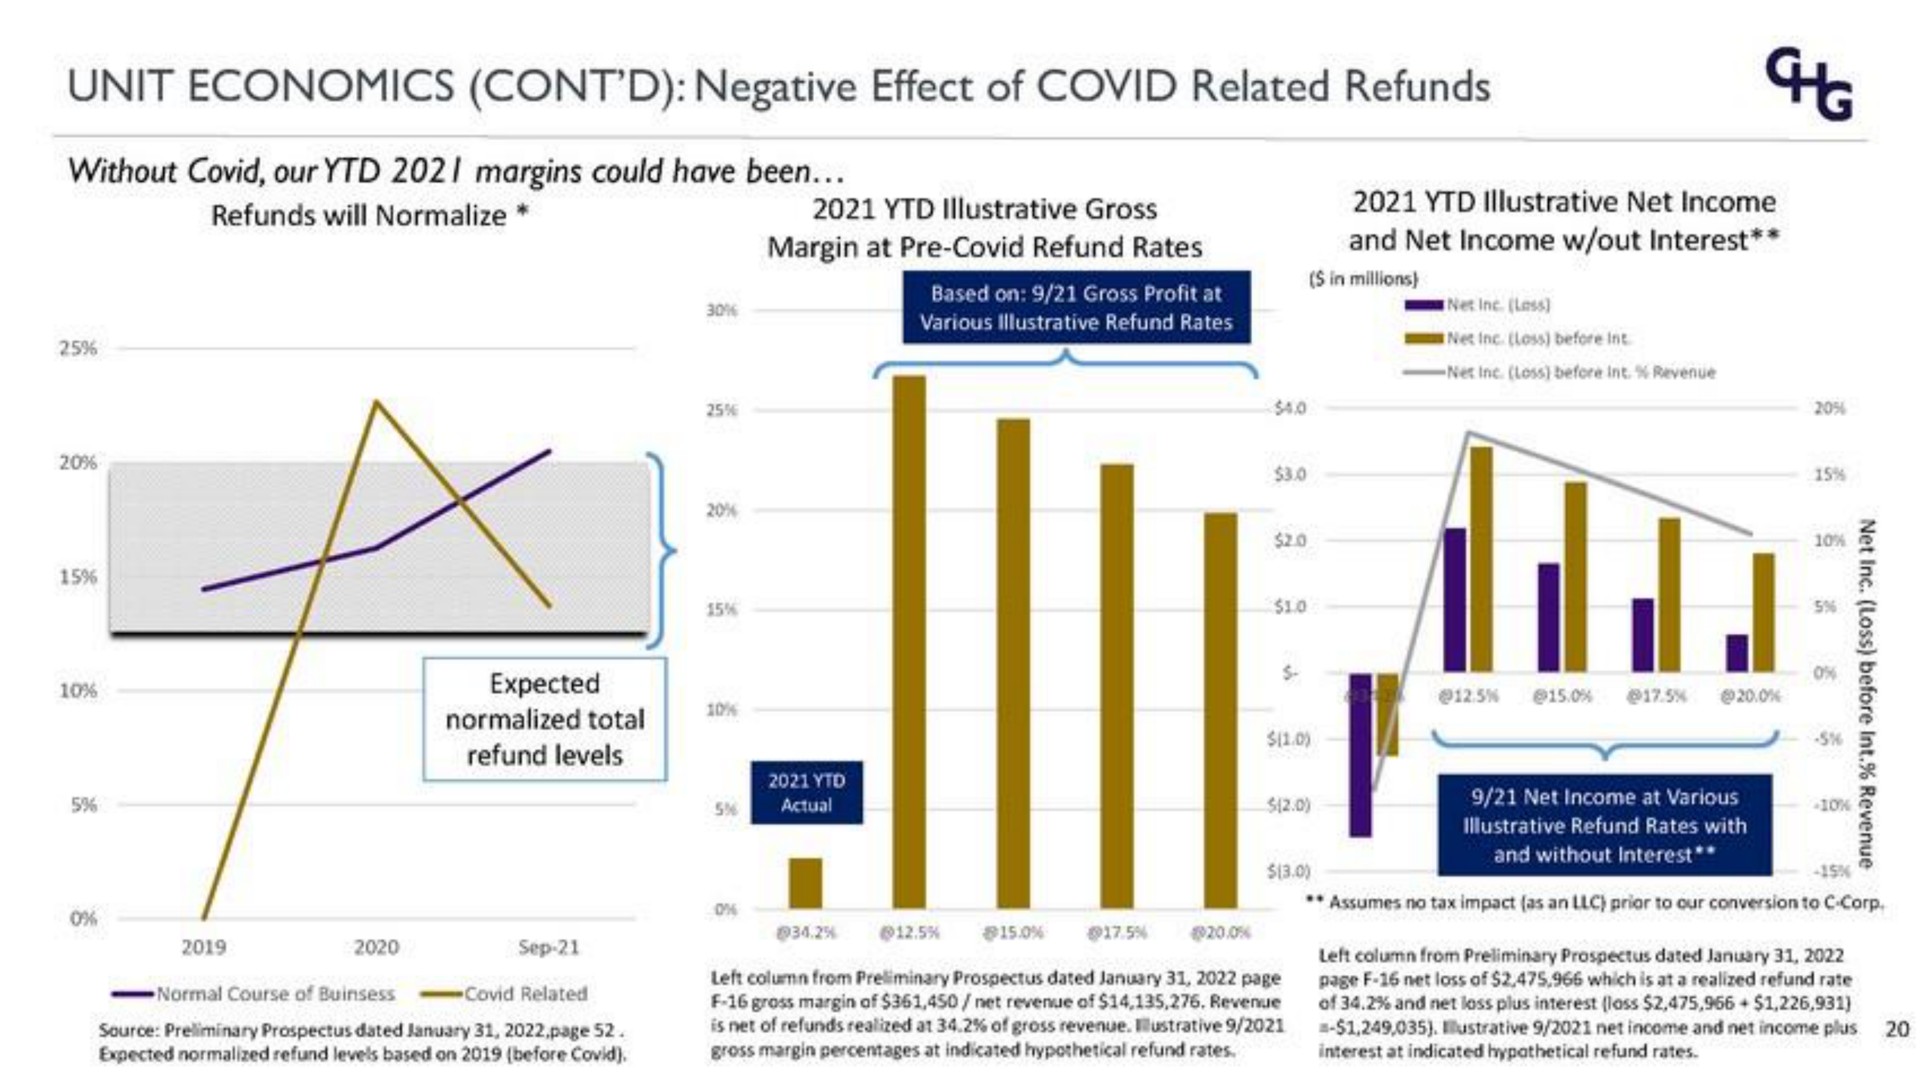 unit economics negative effect of covid related refunds without covid our margins could have been | Corphousing Group